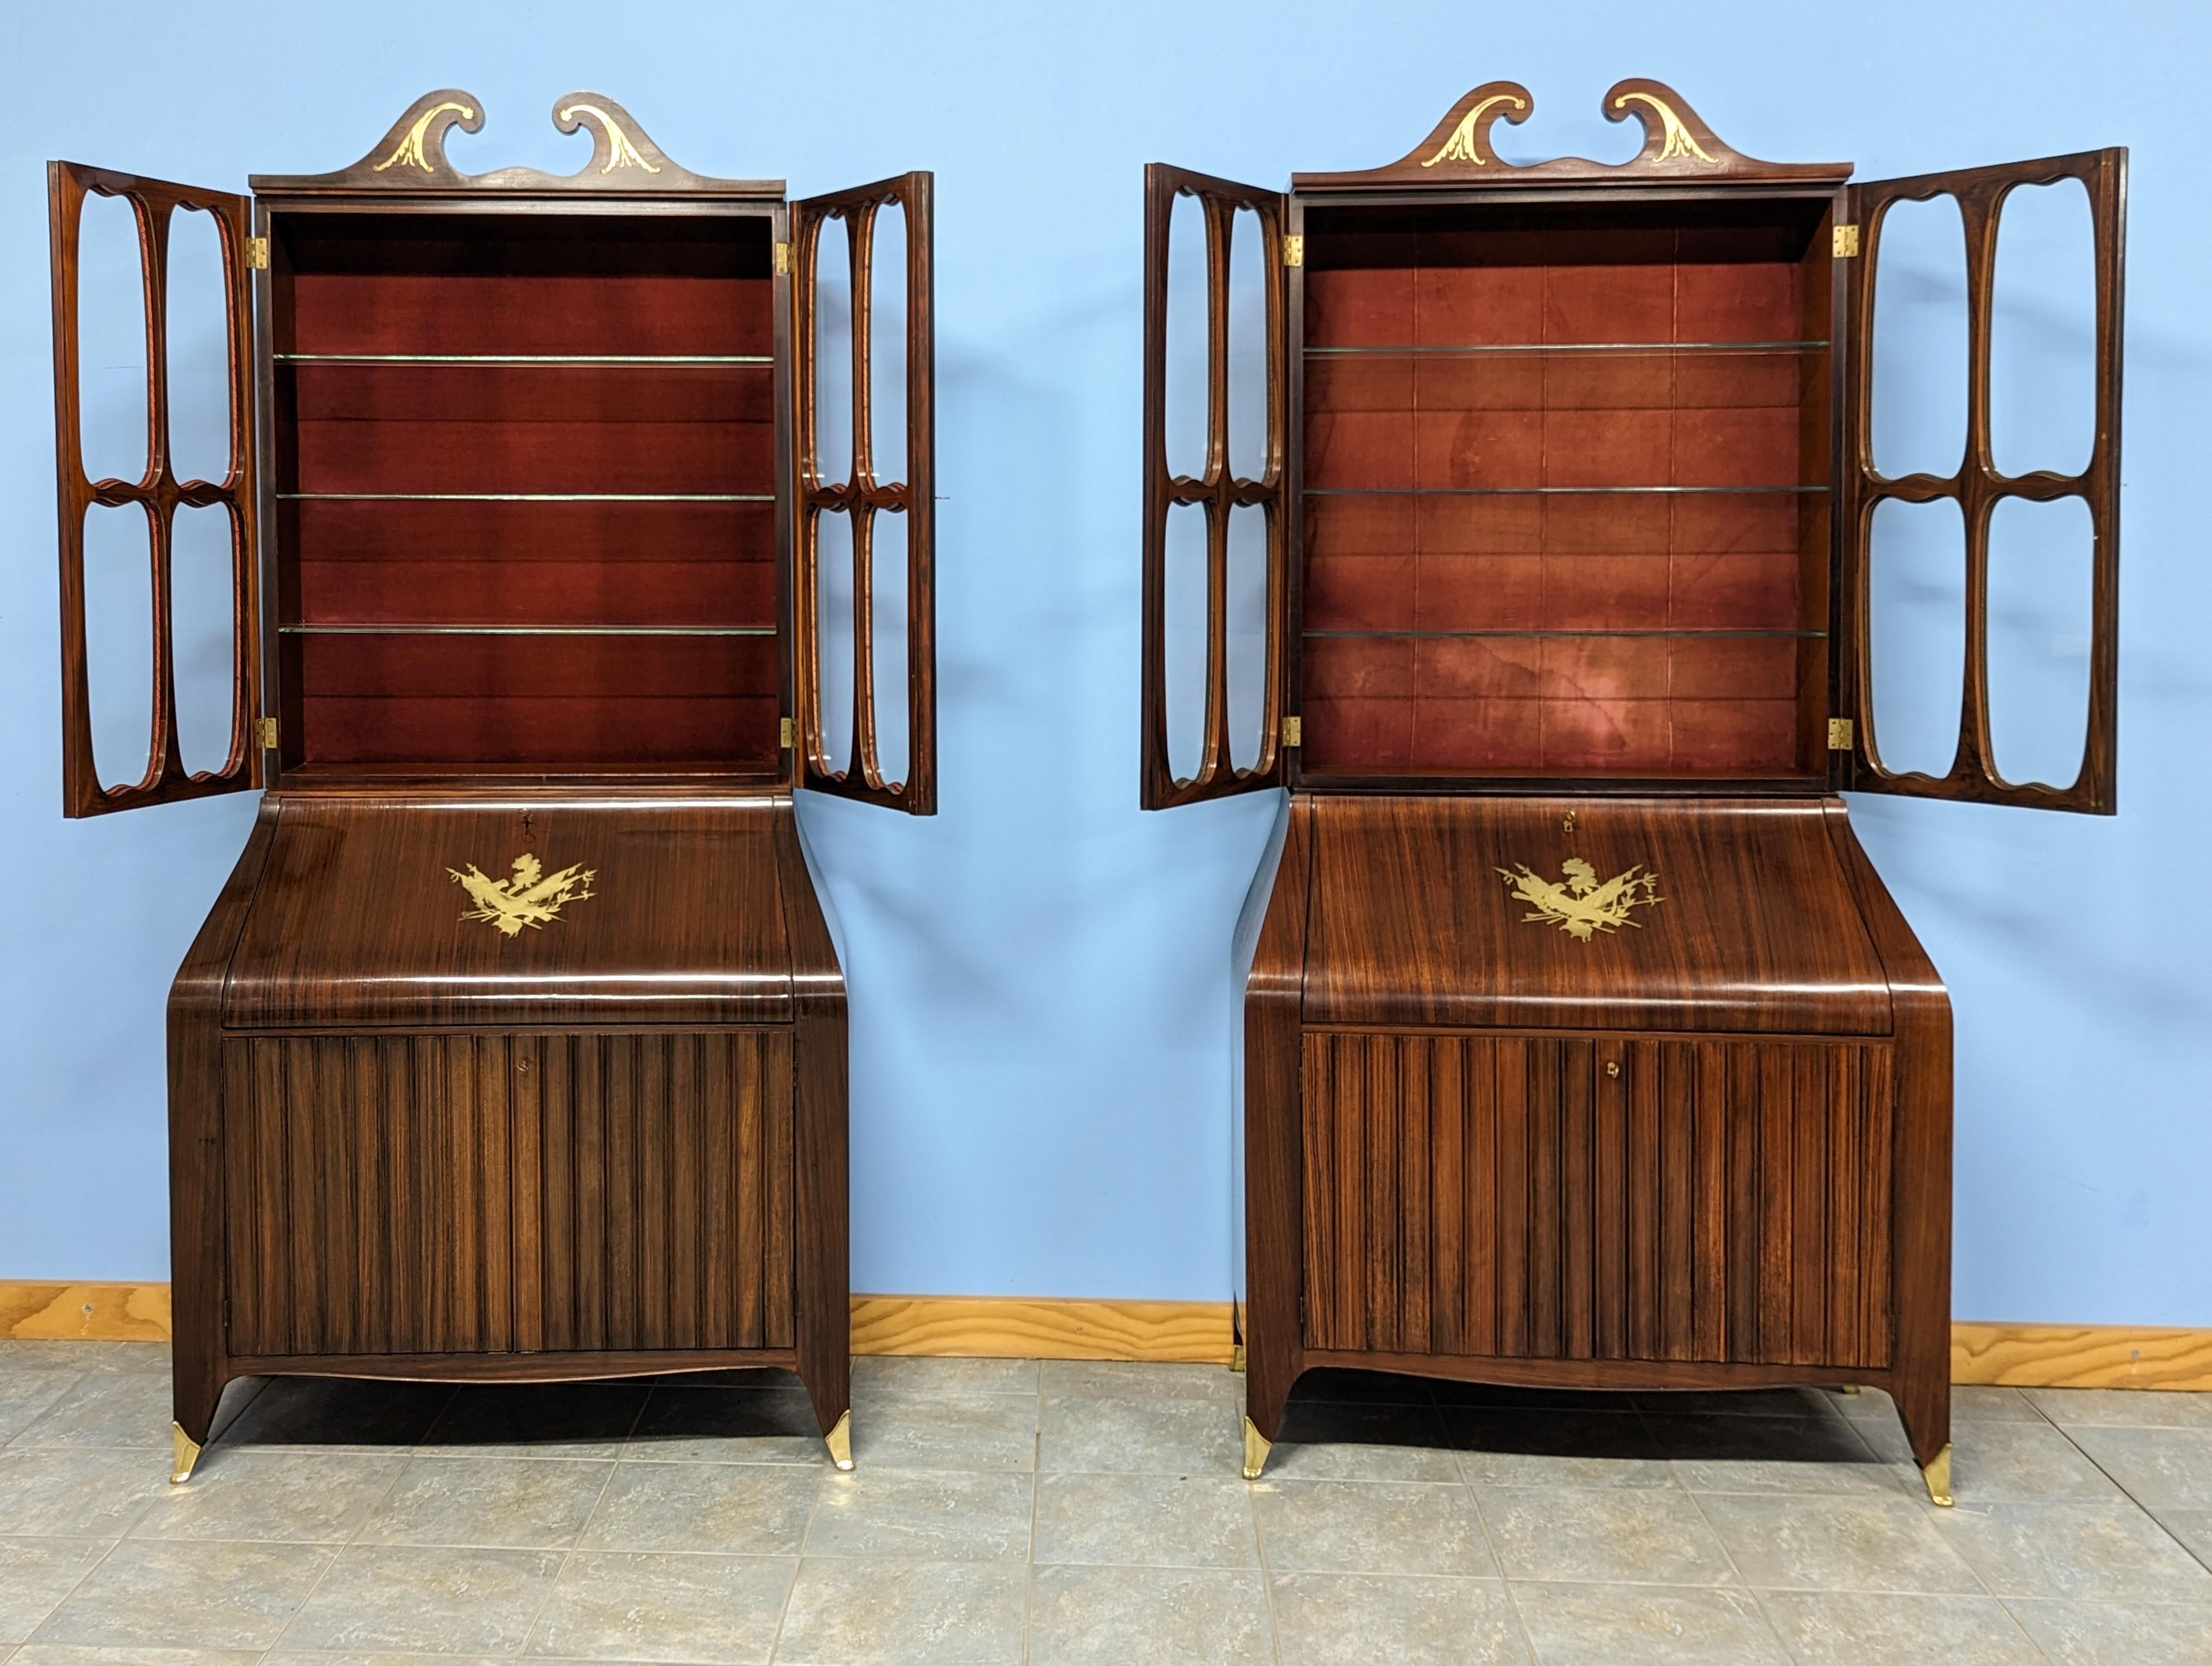 Pair of Trumeau Bookcases in Mahogany Designed by Paolo Buffa, 1950s For Sale 4